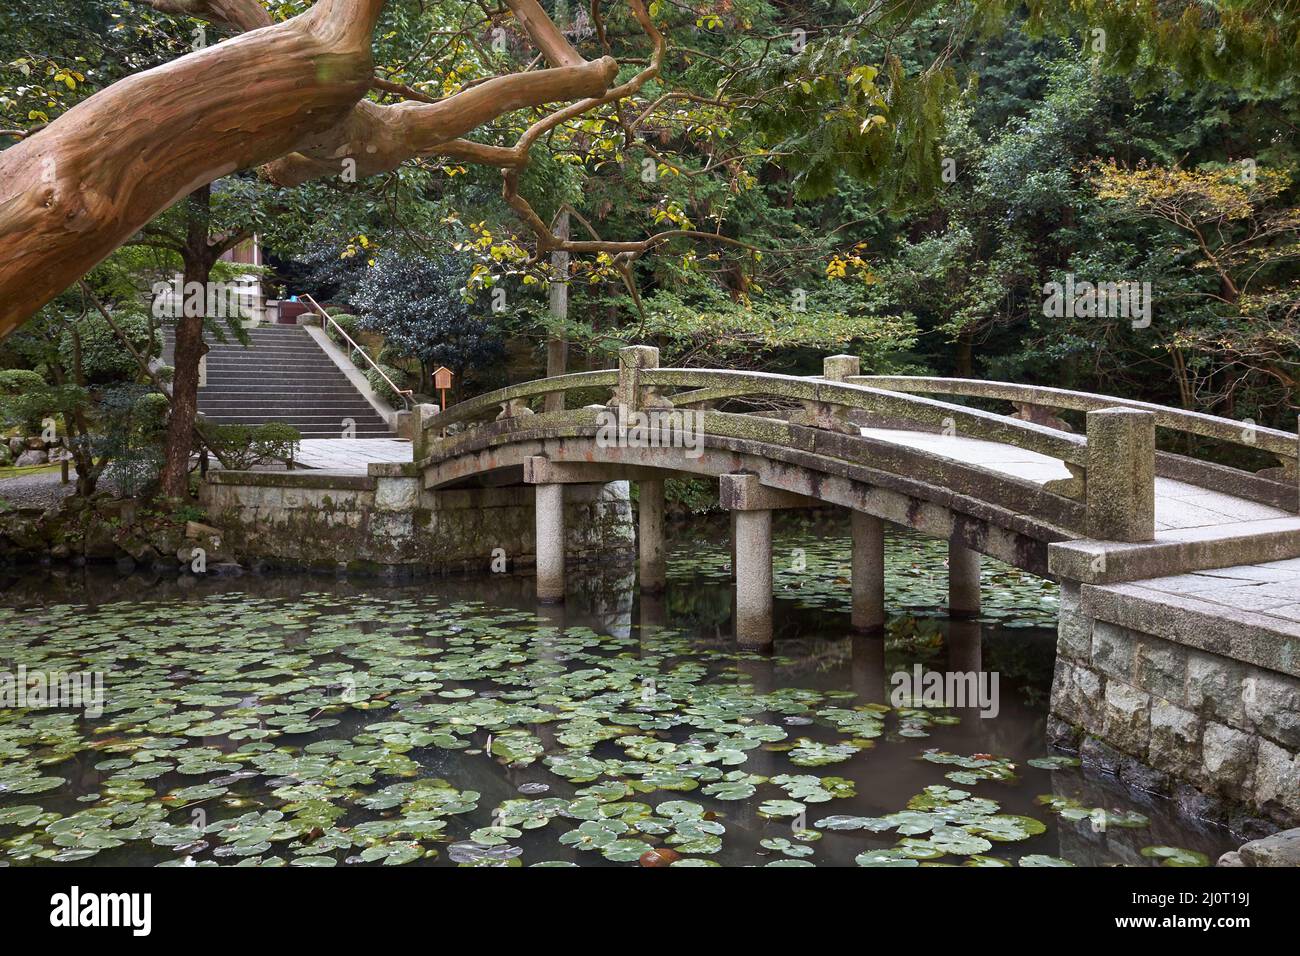 The stone arch bridge over the pond at the Yuzenâ€™en garden of Chion-in temple complex.  Kyoto. Japan Stock Photo